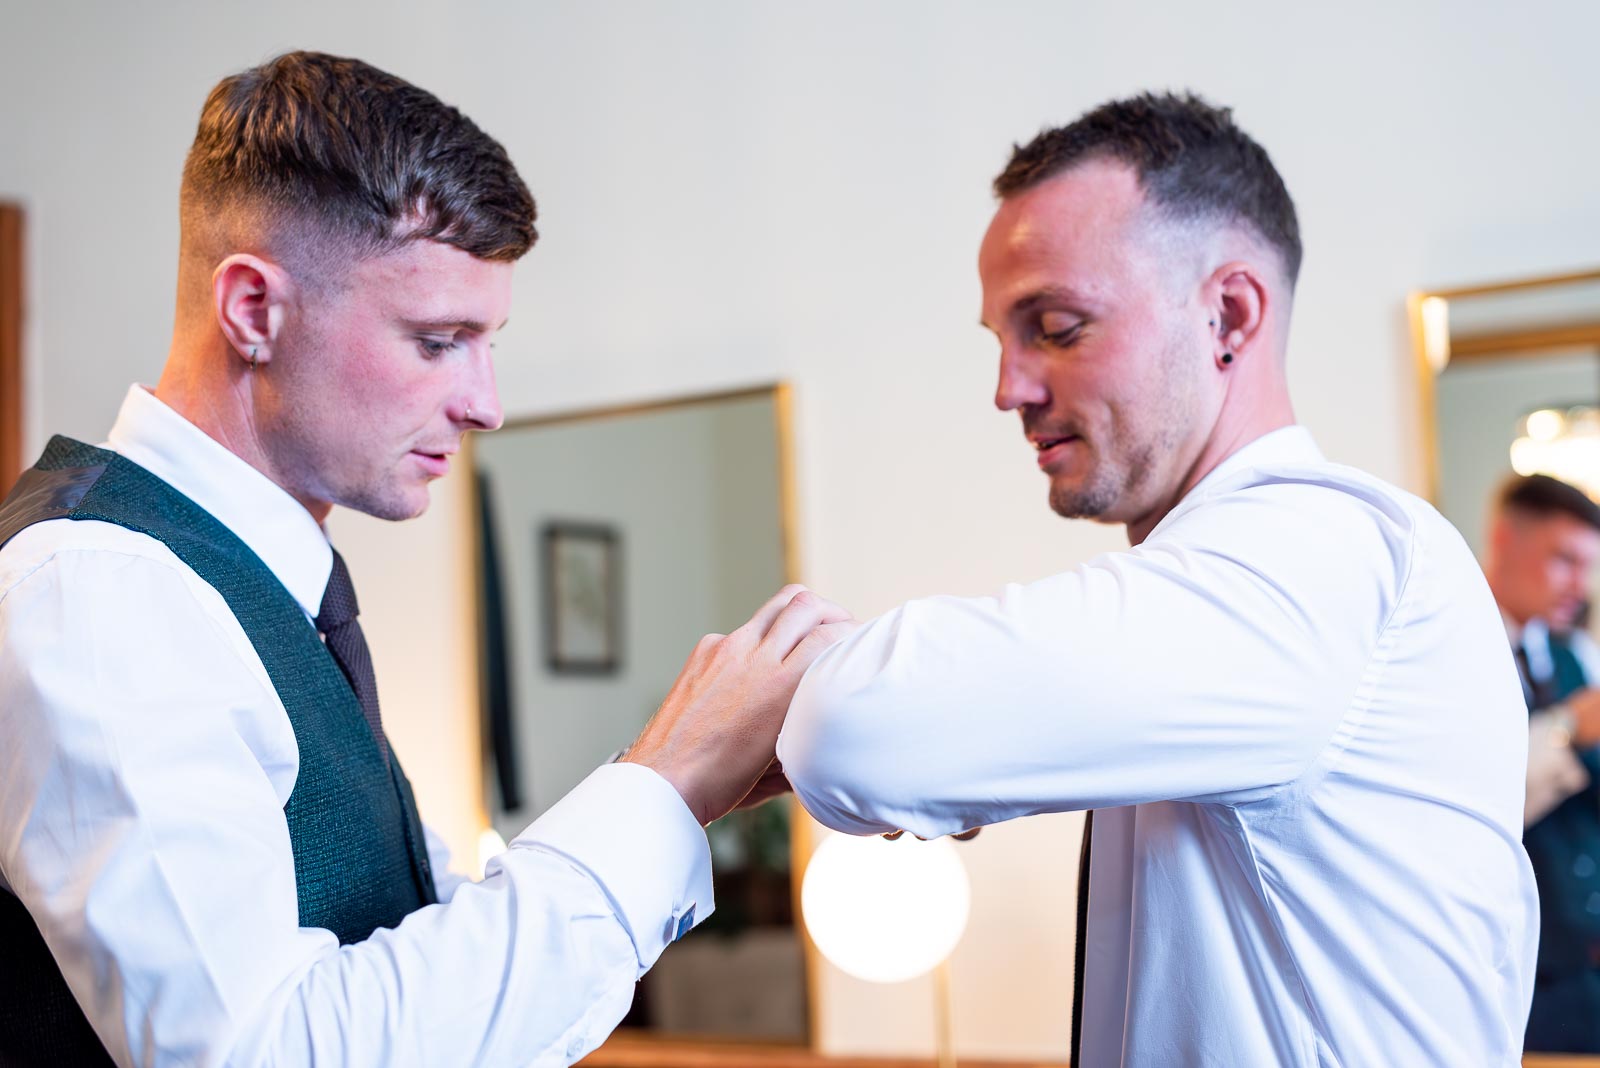 Dean's best man helps him with his cufflinks before his wedding to natalie at Pelham House Hotel, Lewes.